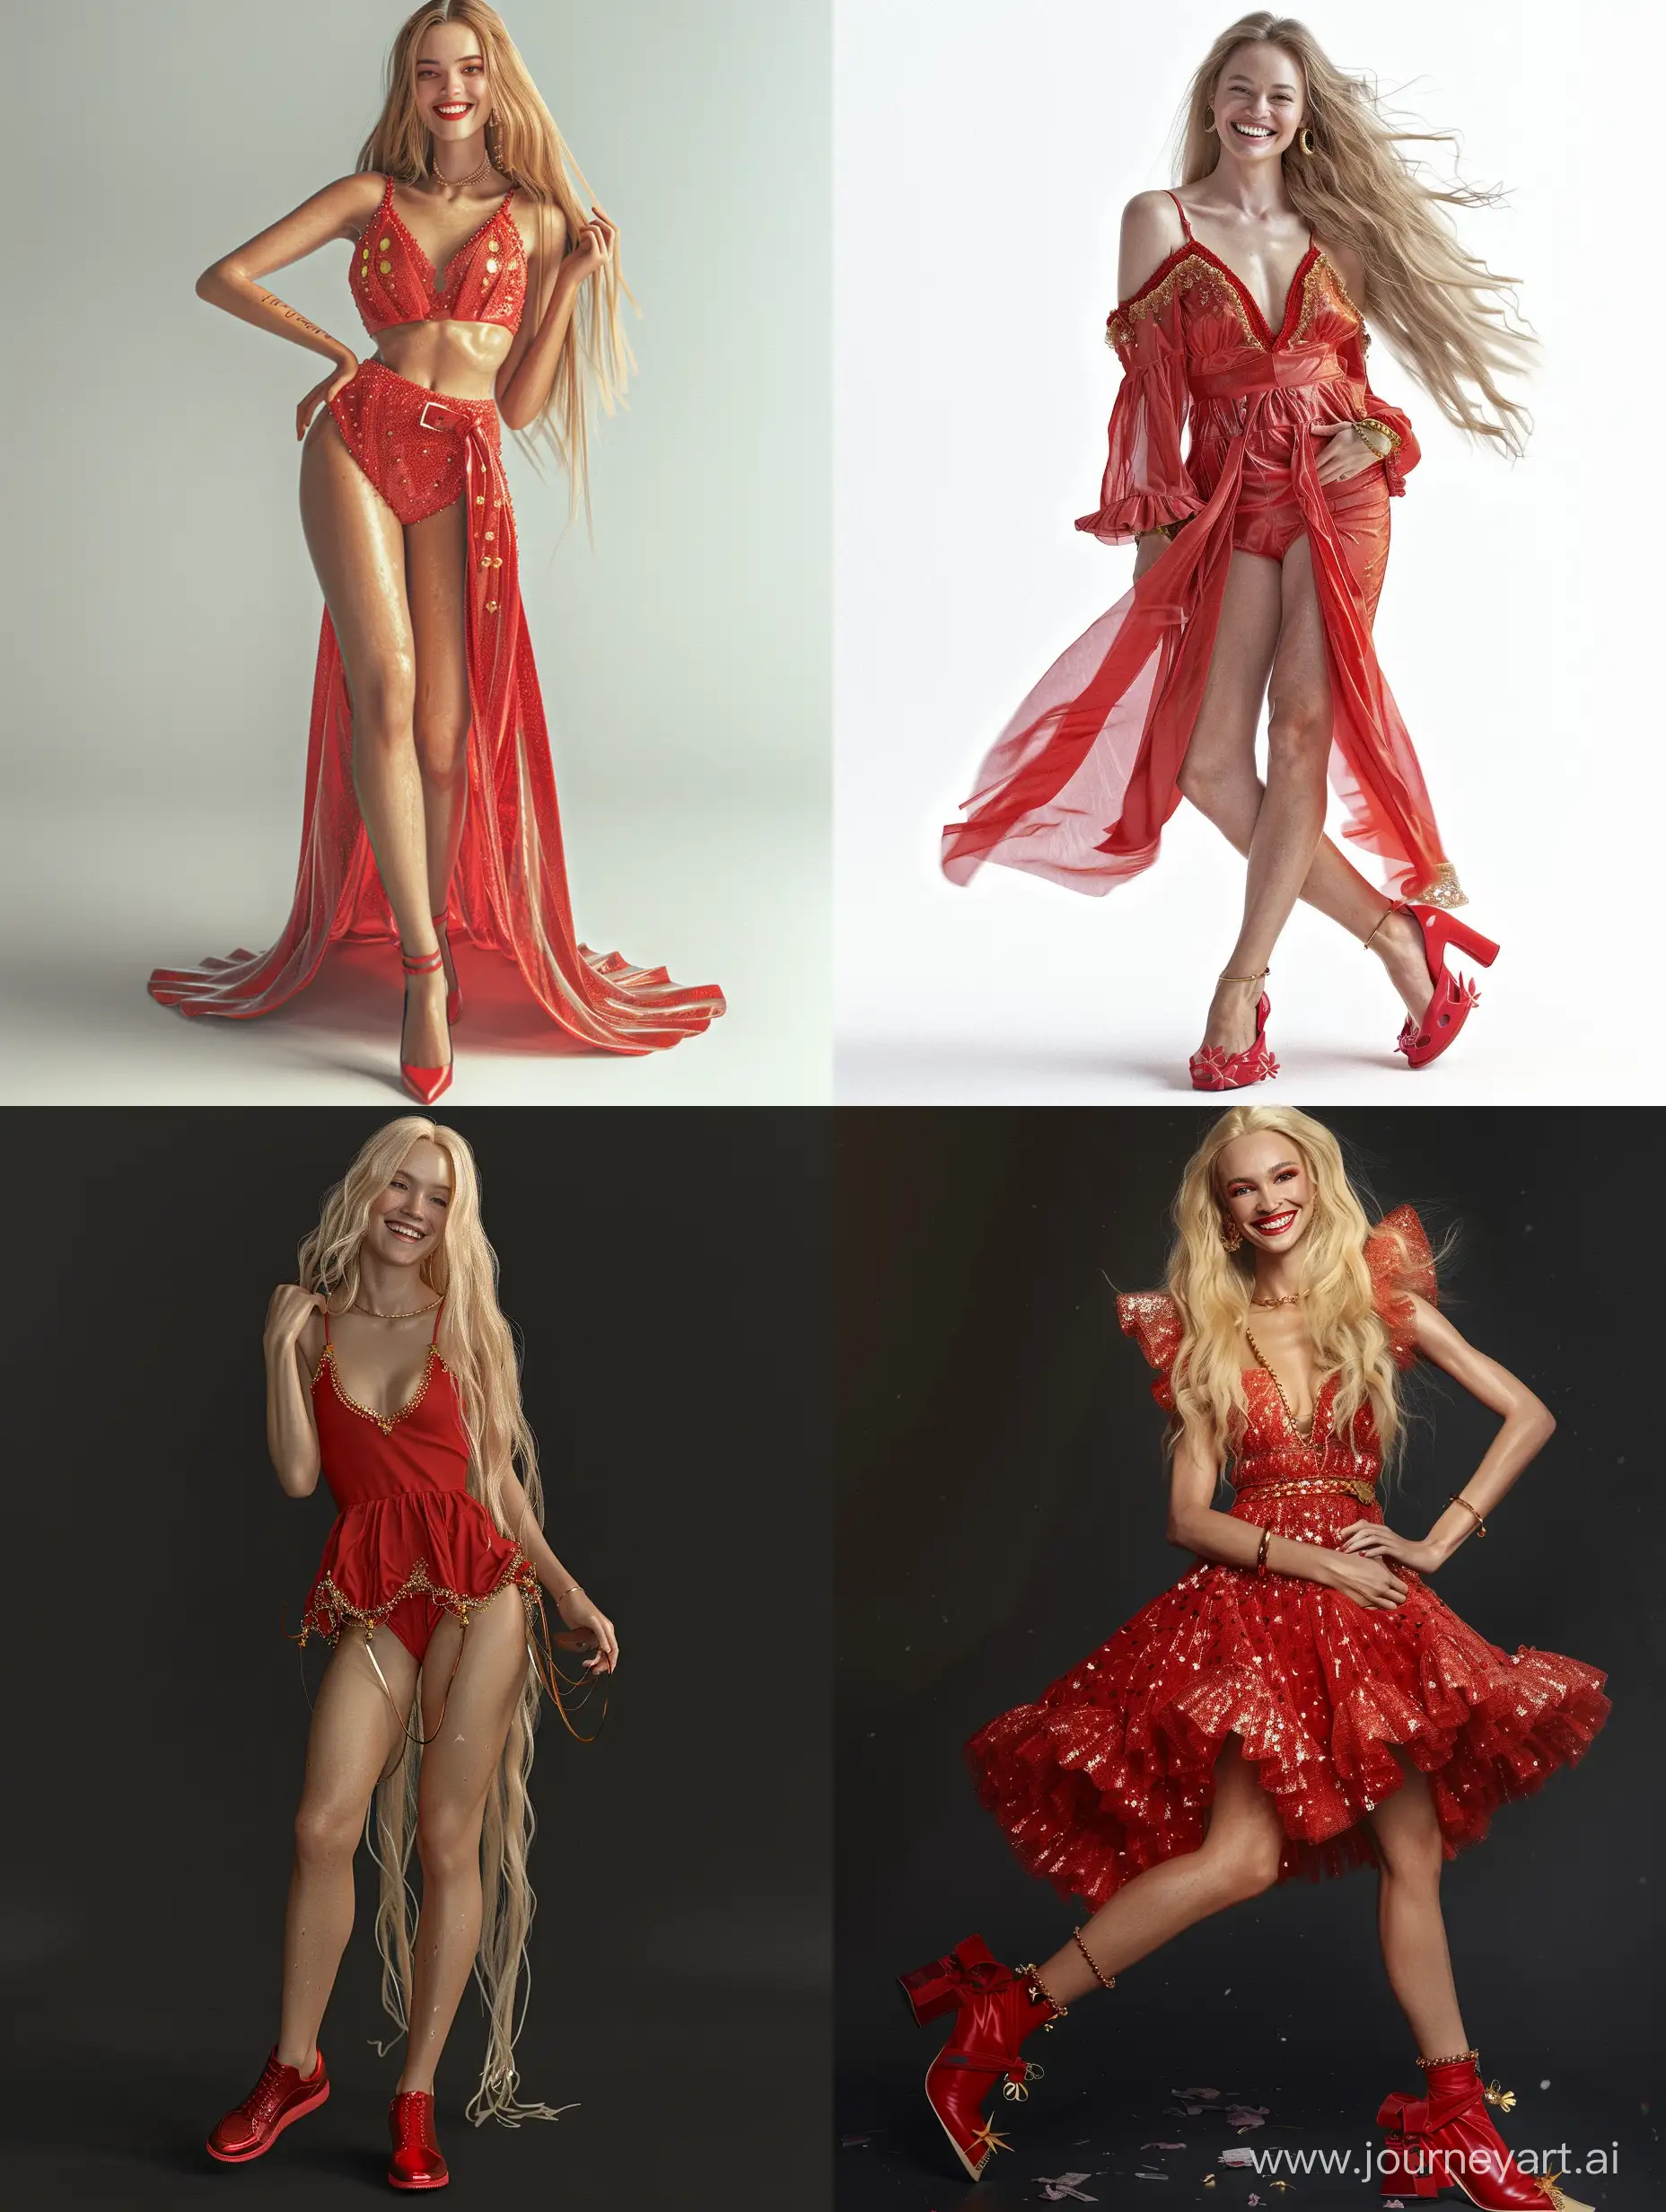 A sexy woman from 80s, red dress, Vogue design, Vogue style, smile, 80s materials, 80s details, 80s visual, 80s hair and dress, long blonde hair, pose, gold details, red shoes, detailed, real, realistic, photorealistic, vintage, retro, indie, classic, antique, tend, rosé and white aestethic, Vogue concept dress, special edition